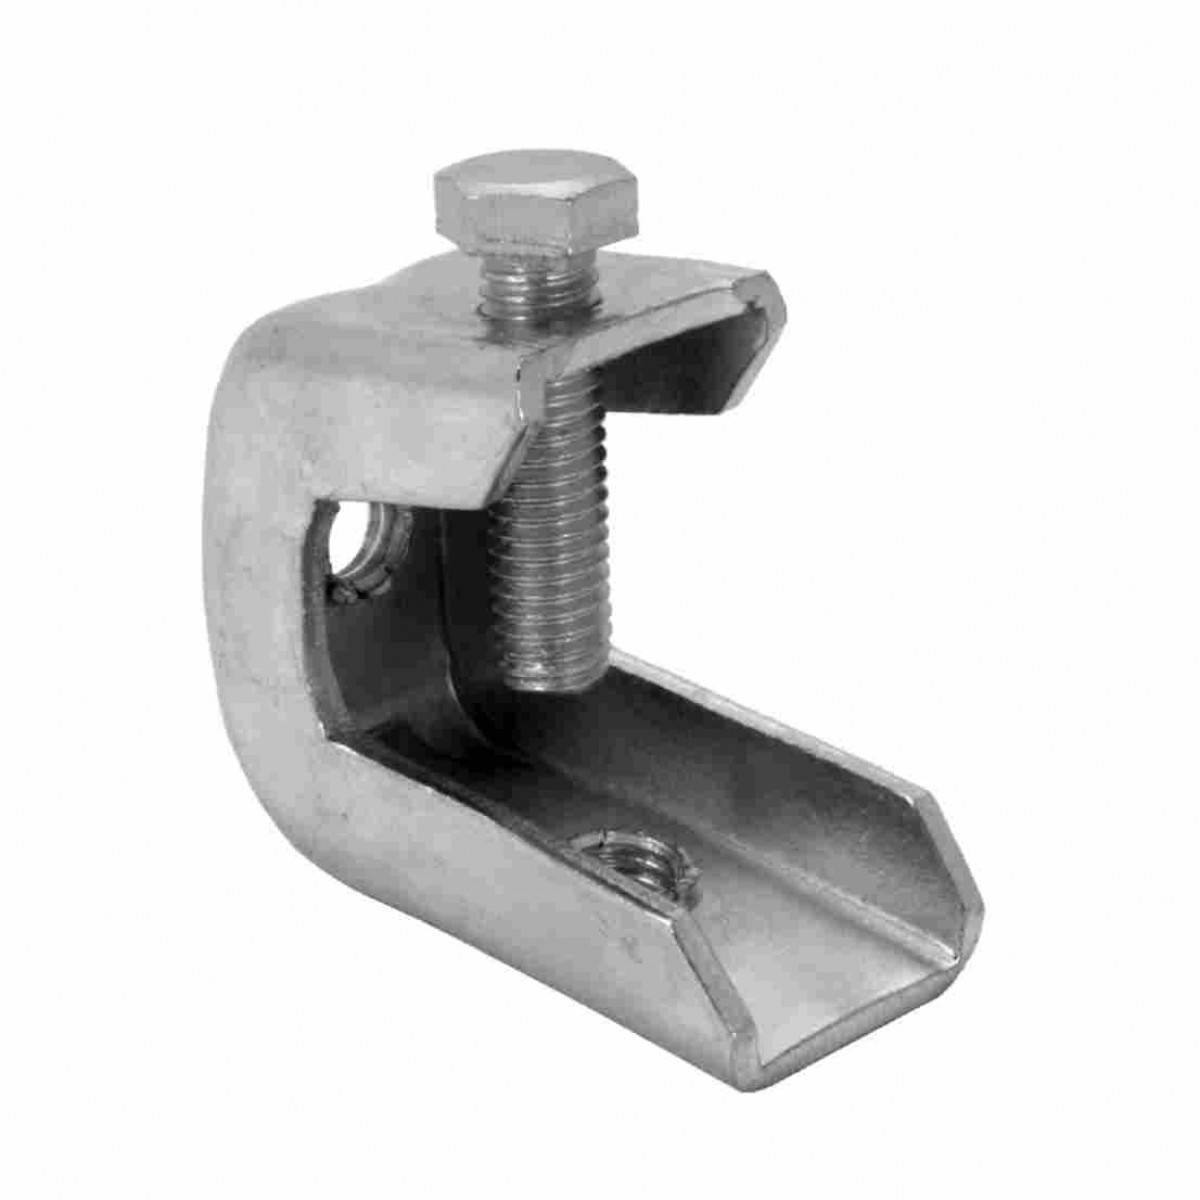 STEEL BEAM CLAMPS - Conduit Supports, Straps, Clamps 